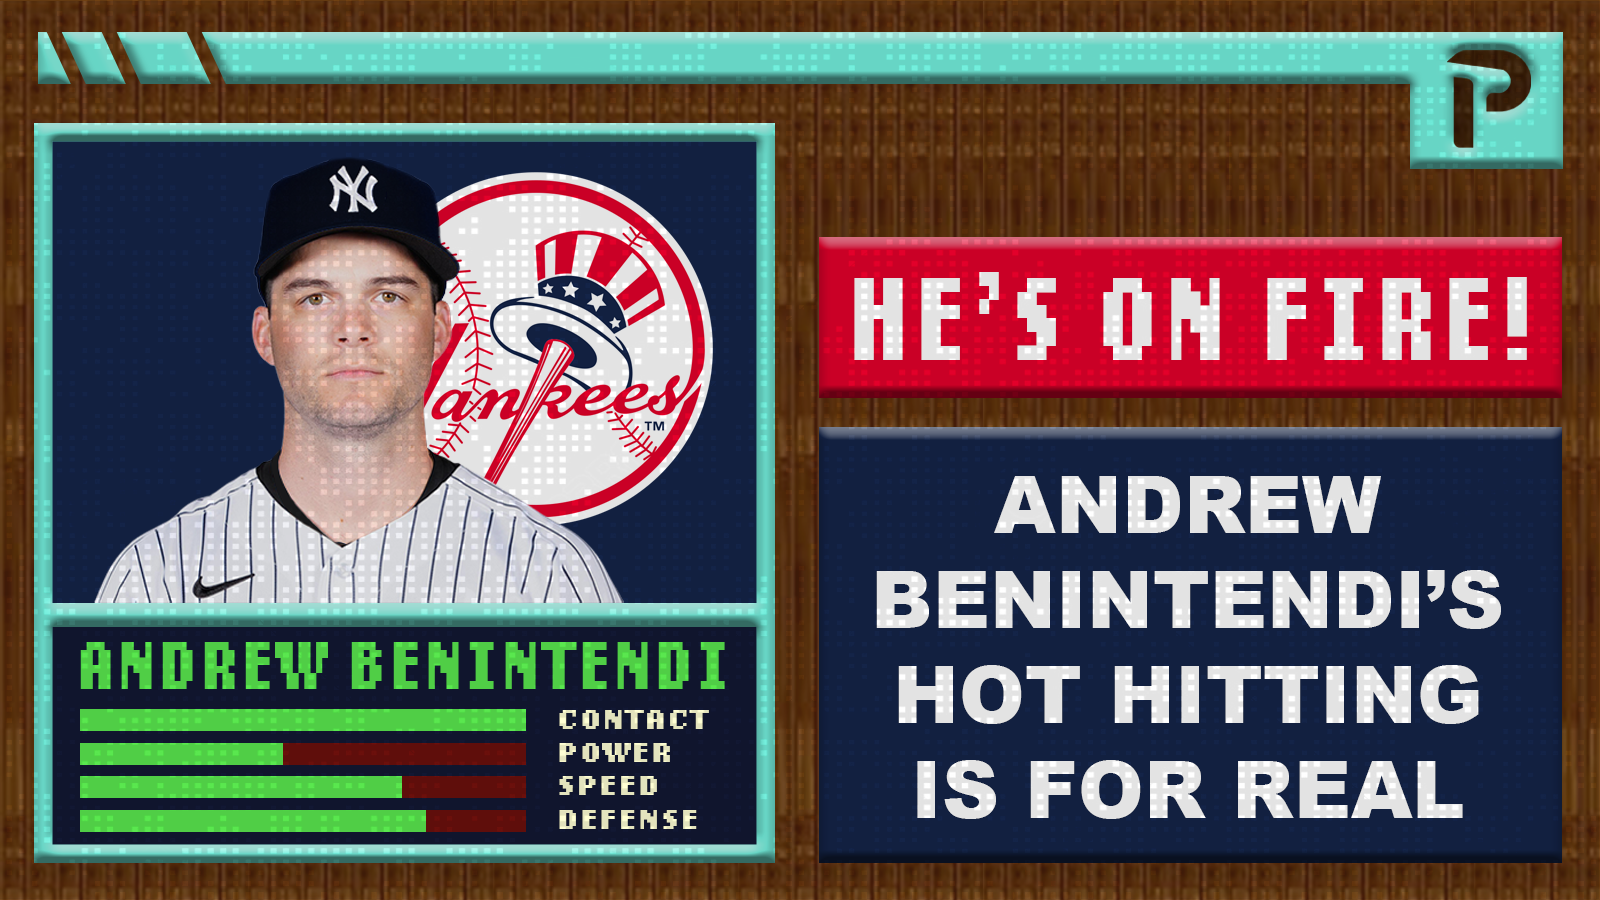 Badass Ray of Sunshine — I really just want Andrew Benintendi (and his